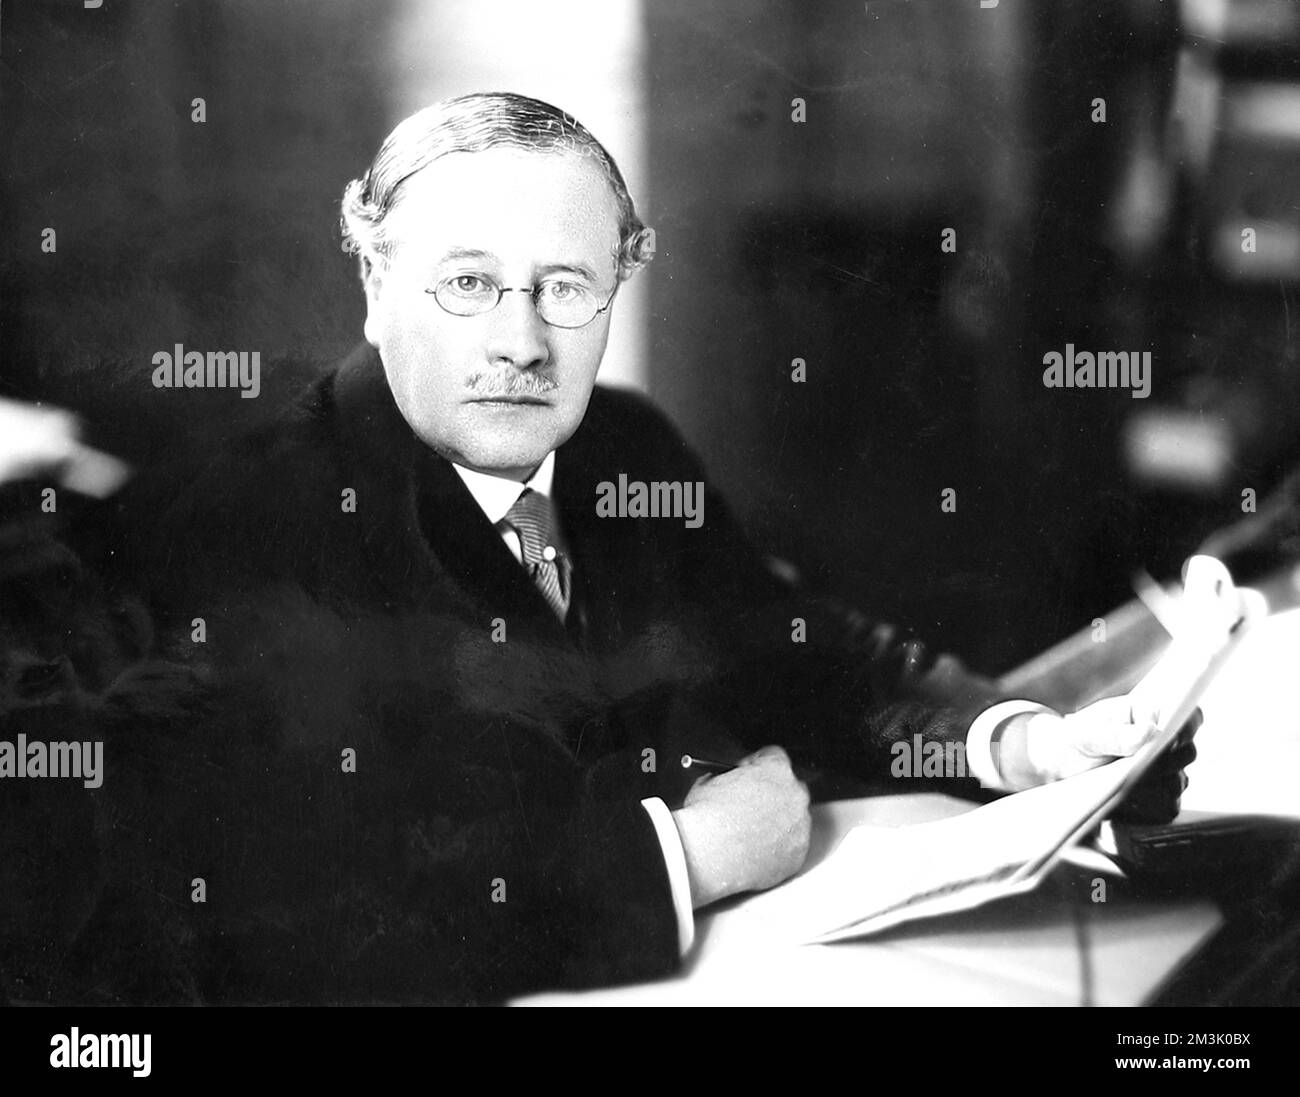 Photograph of Sir Kingsley Wood, the Conservative MP, who sat in the House of Commons between 1918 and 1943.  As Chancellor of the Exchequer, between 1940 and 1943, he devised the pay-as-you-earn income tax system.     Date: 1800 Stock Photo